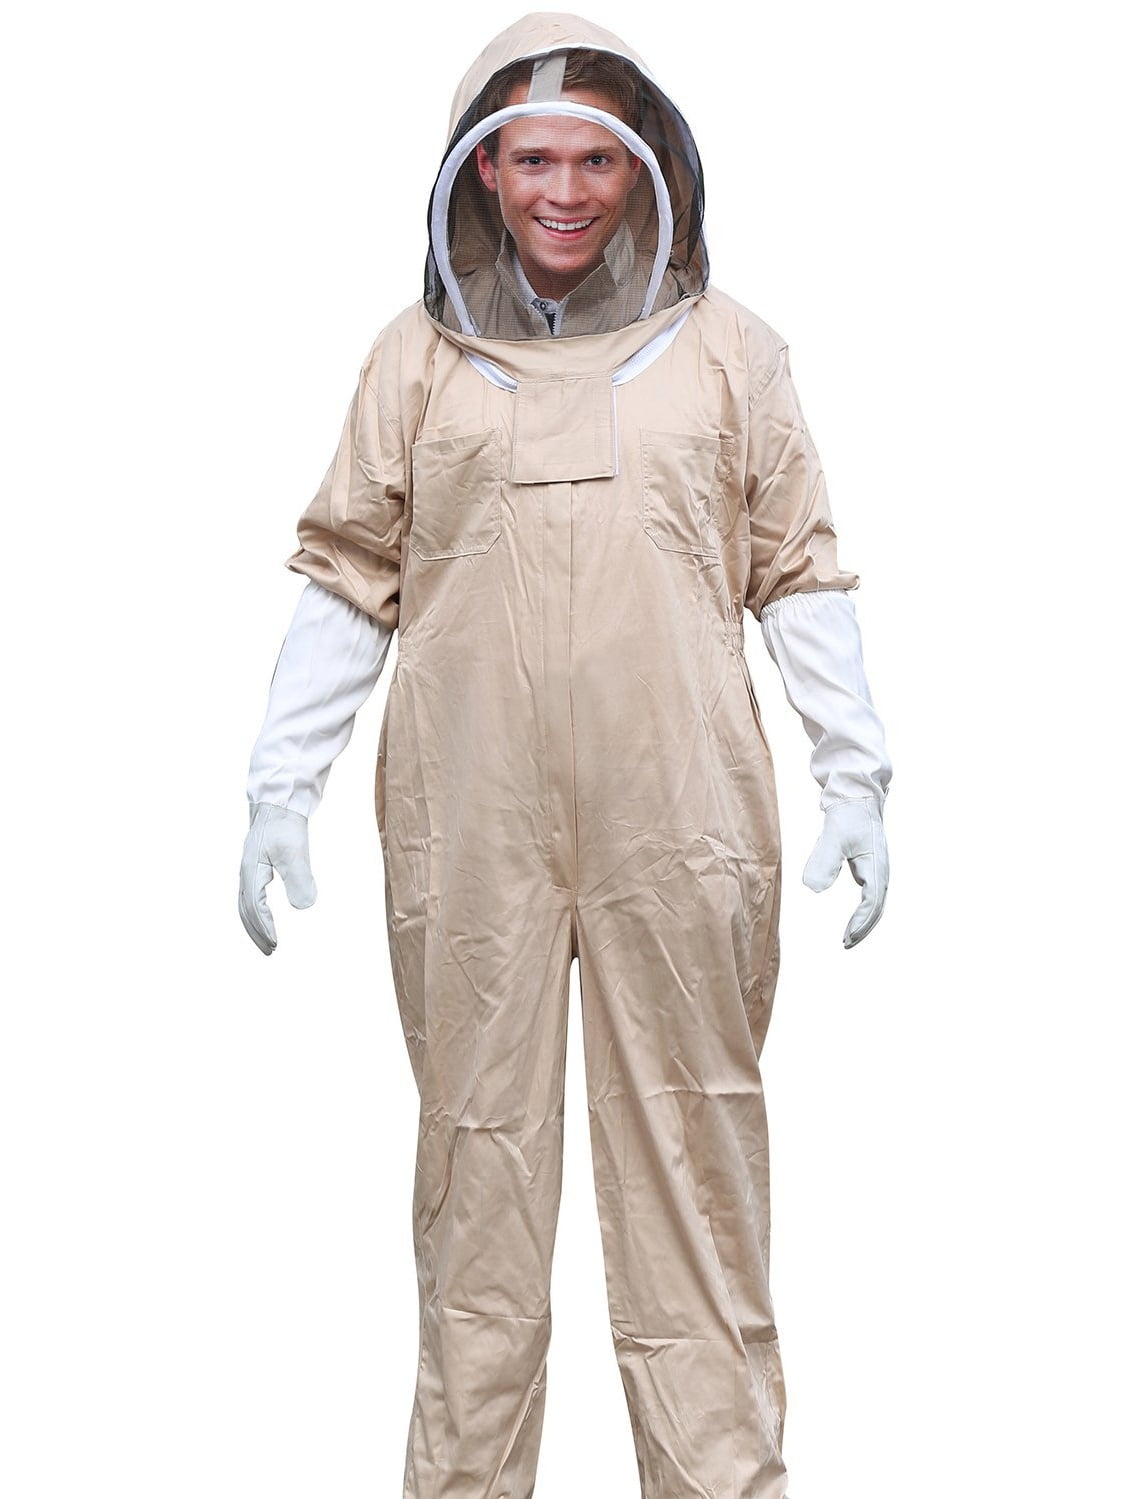 Complete Professional Bee Suit-2X-Large 